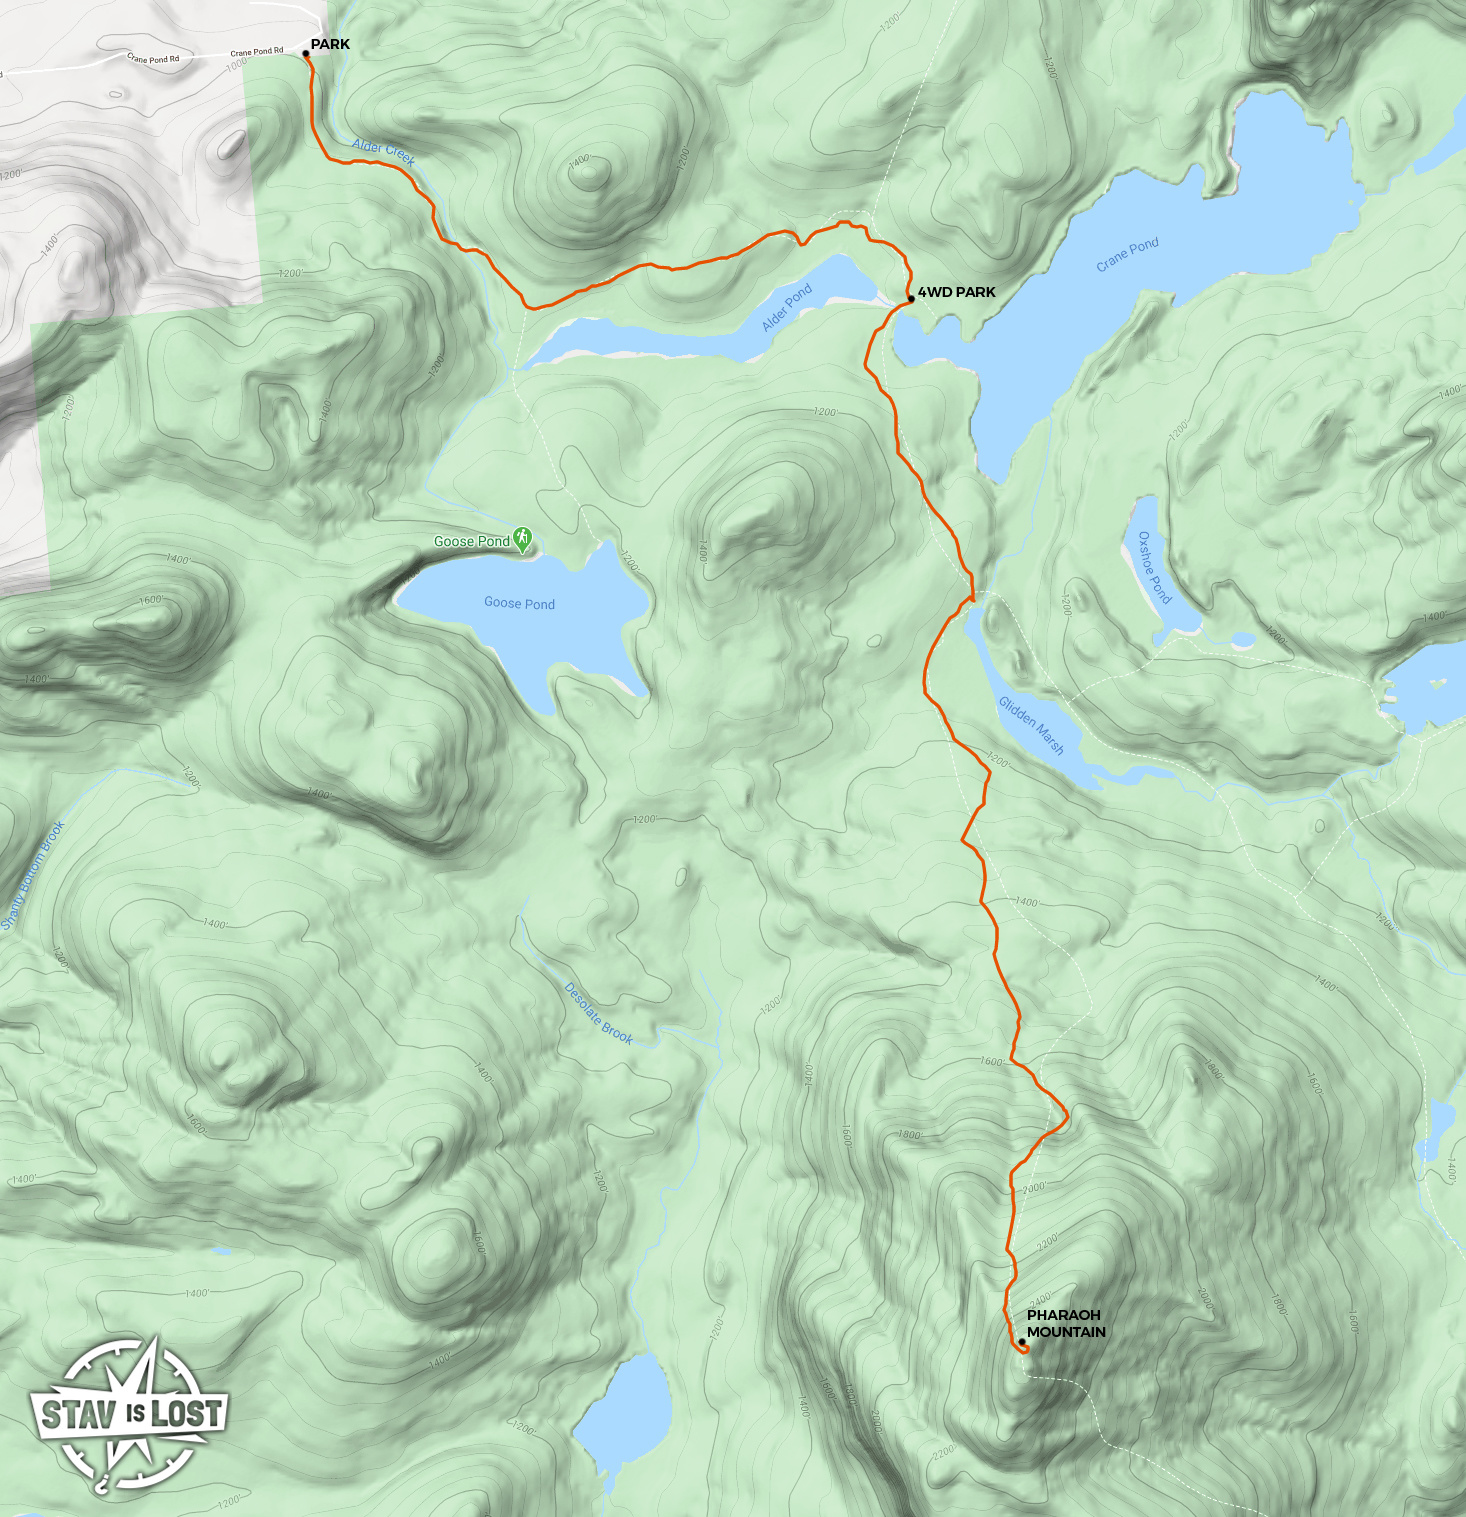 map for Pharaoh Mountain via Crane Pond by stav is lost